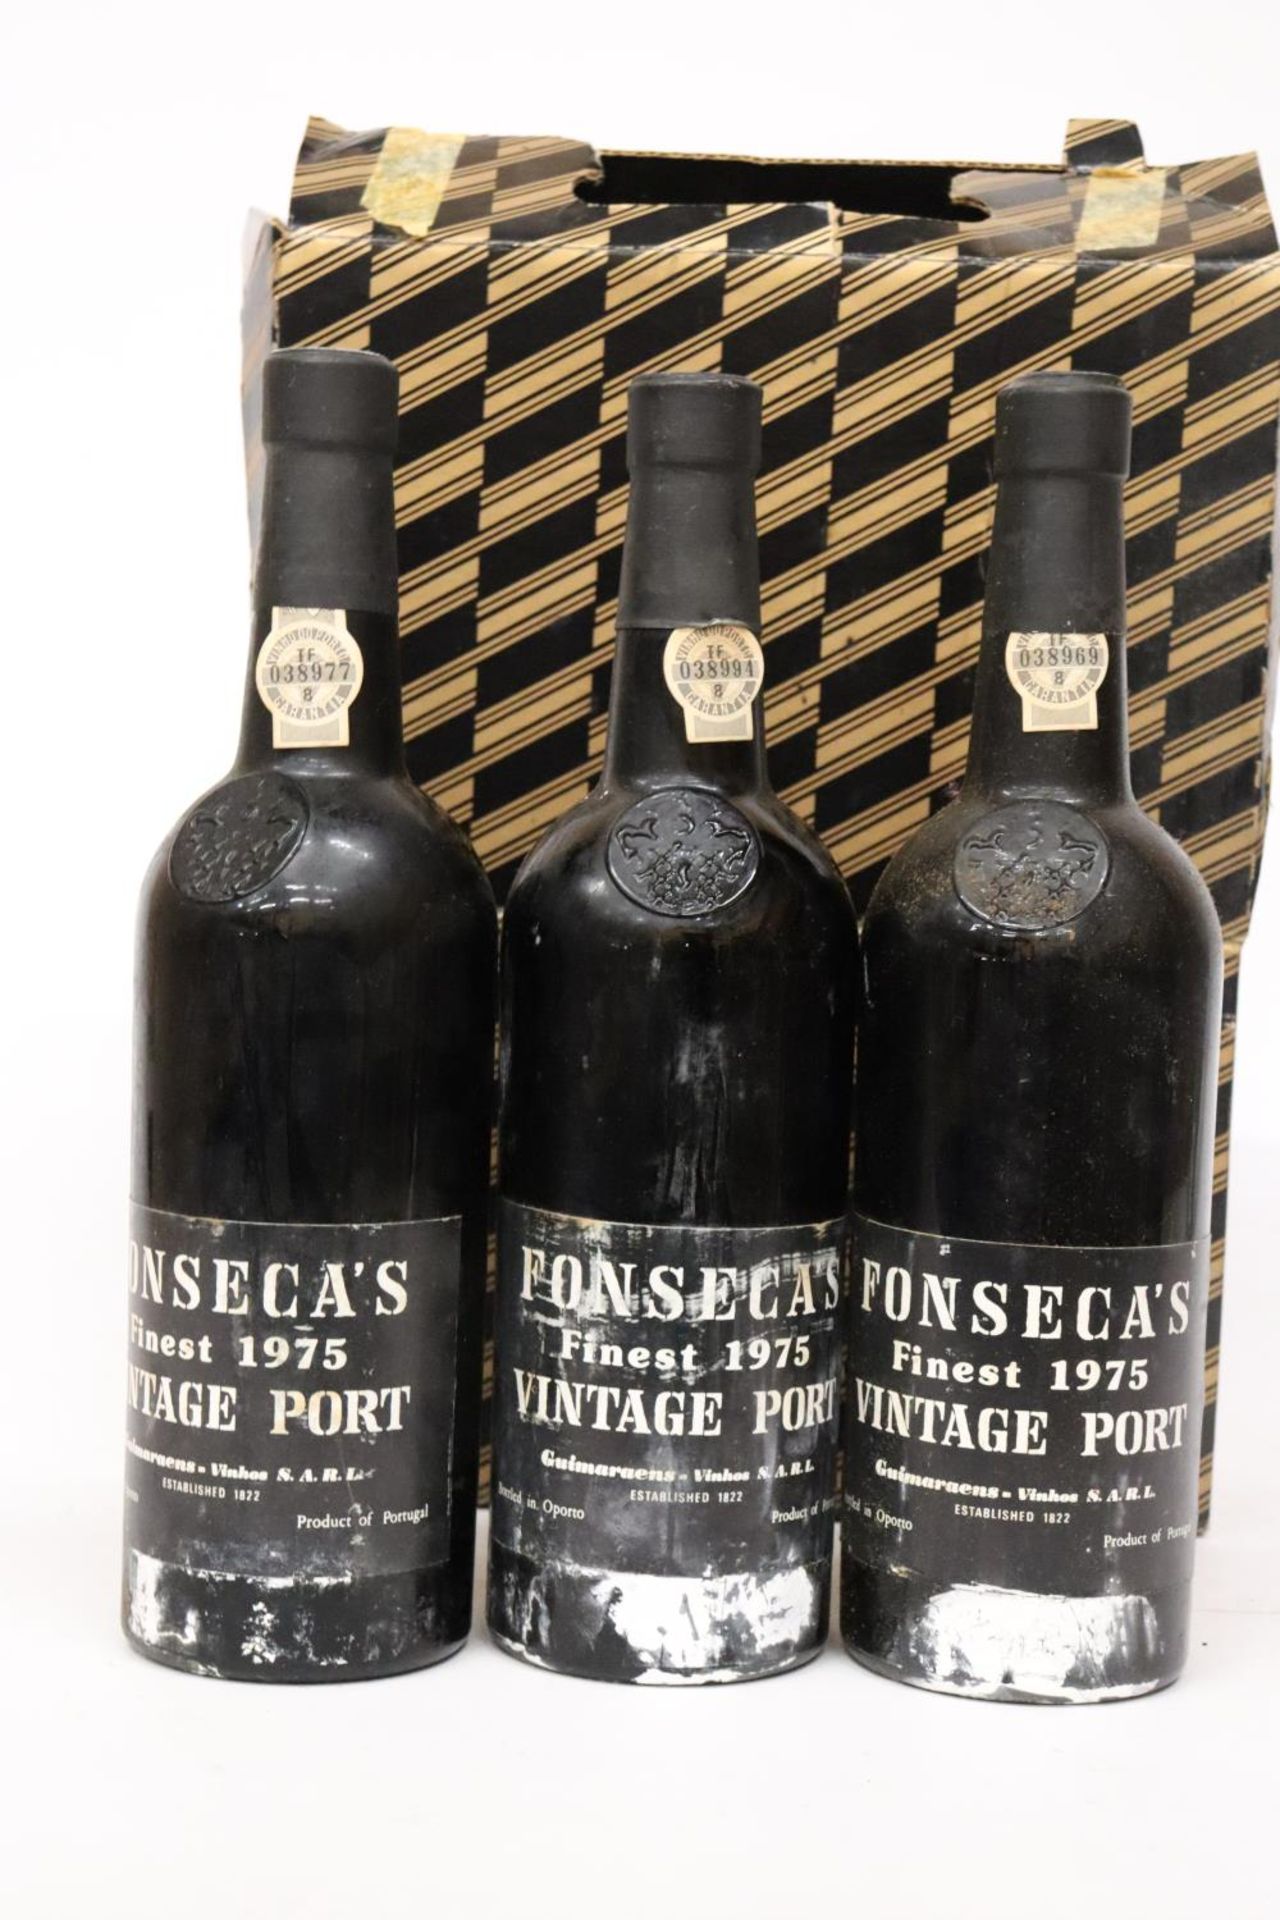 THREE BOTTLES OF FONSECAS 1975 VINTAGE PORT IN A BOX